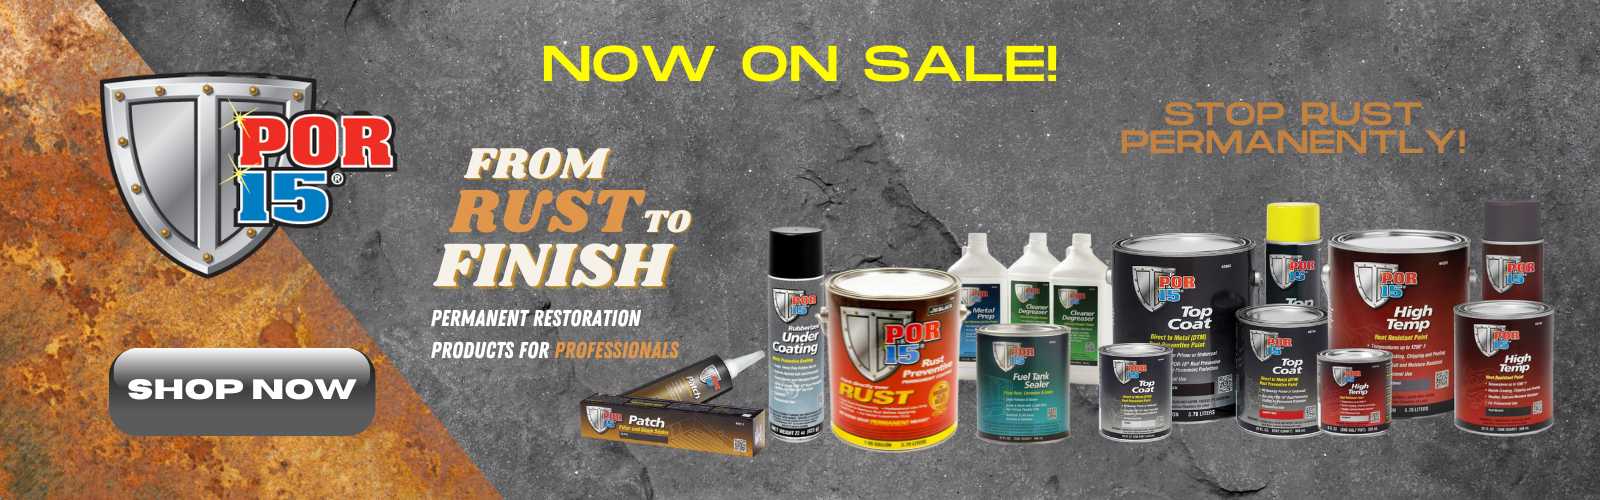 POR-15 Rust Preventive Paint products to stop rust permanently